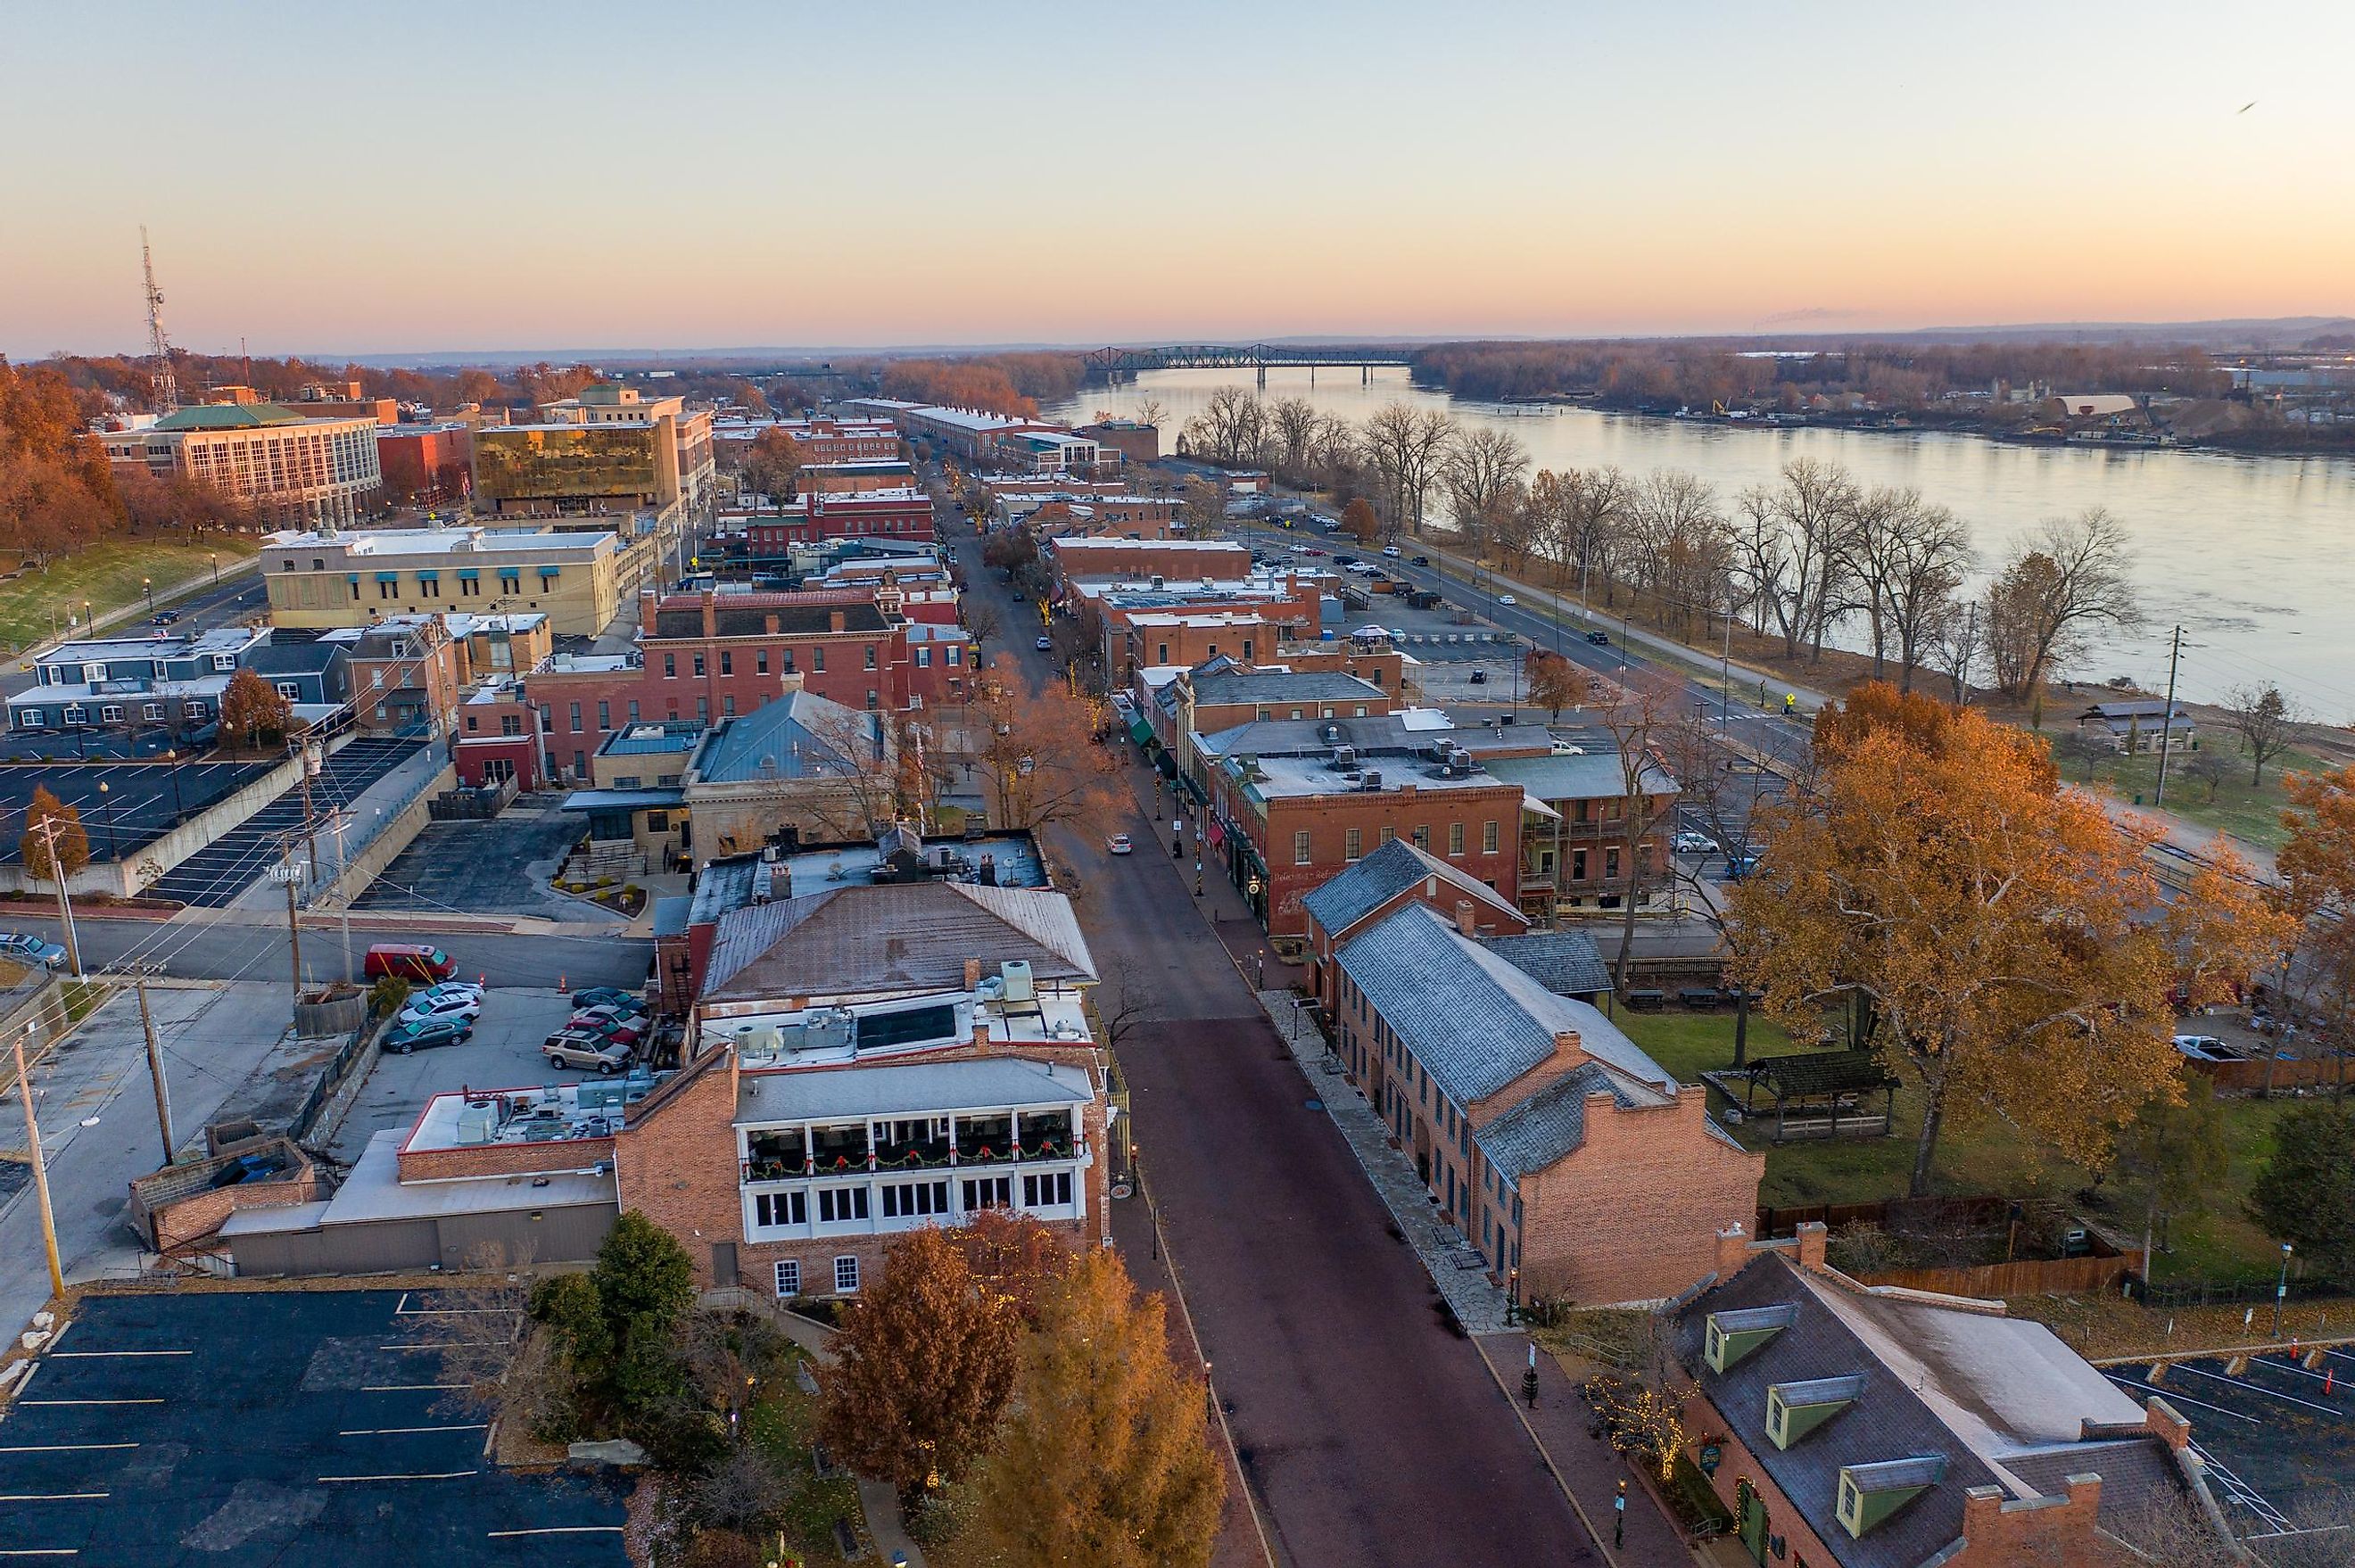 St Charles, Missouri / United States - November 24, 2019: Aerial View of Historic Downtown St Charles